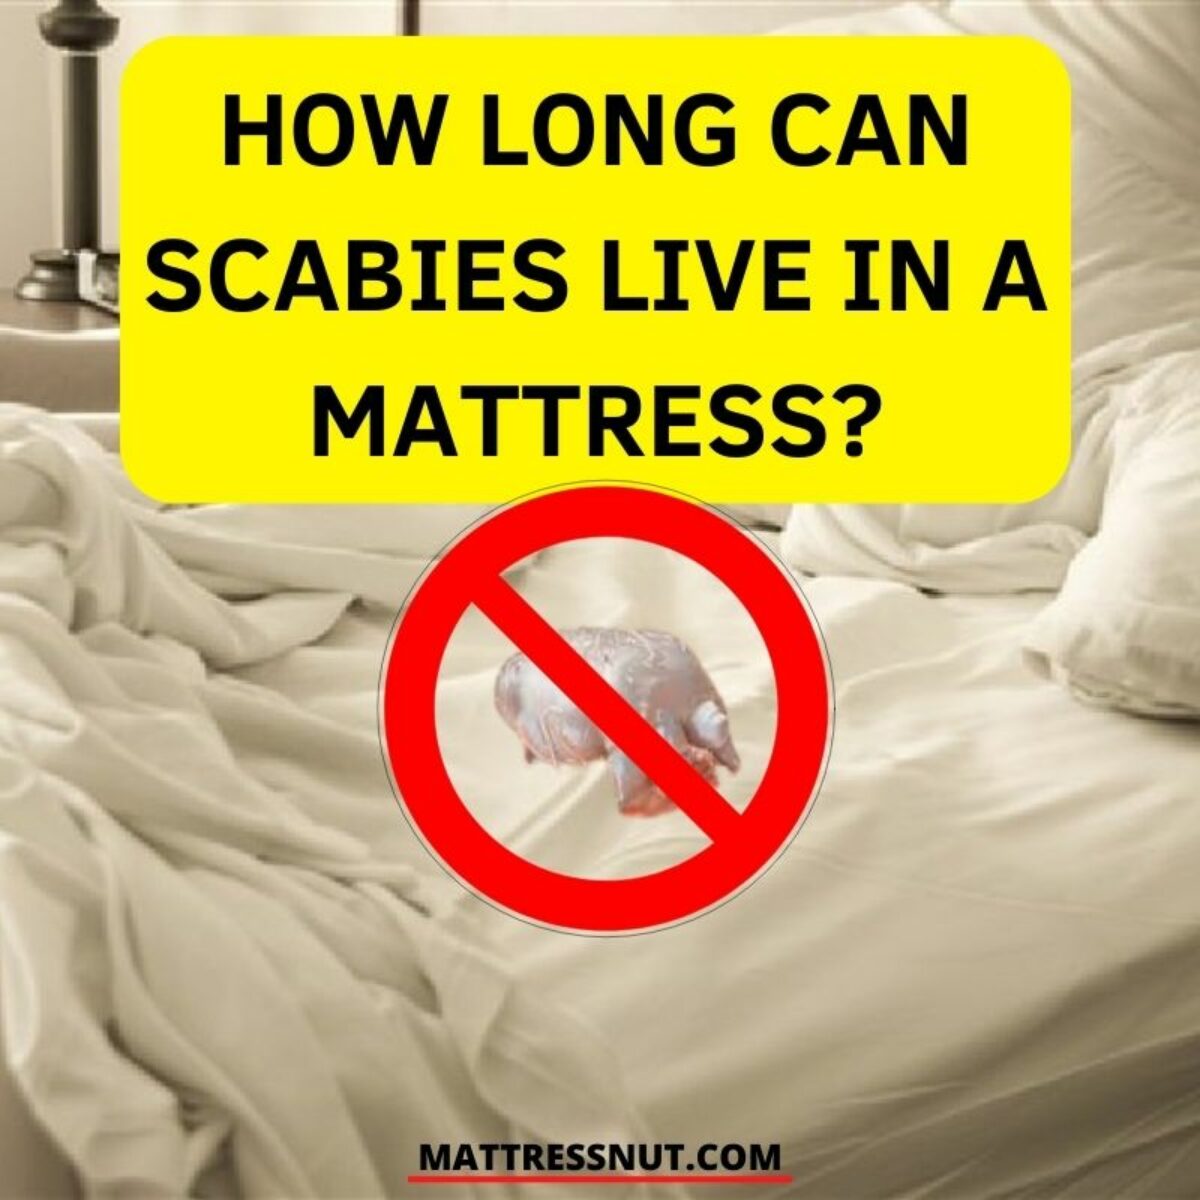 How to Get Rid of Scabies From Mattress - Amerisleep